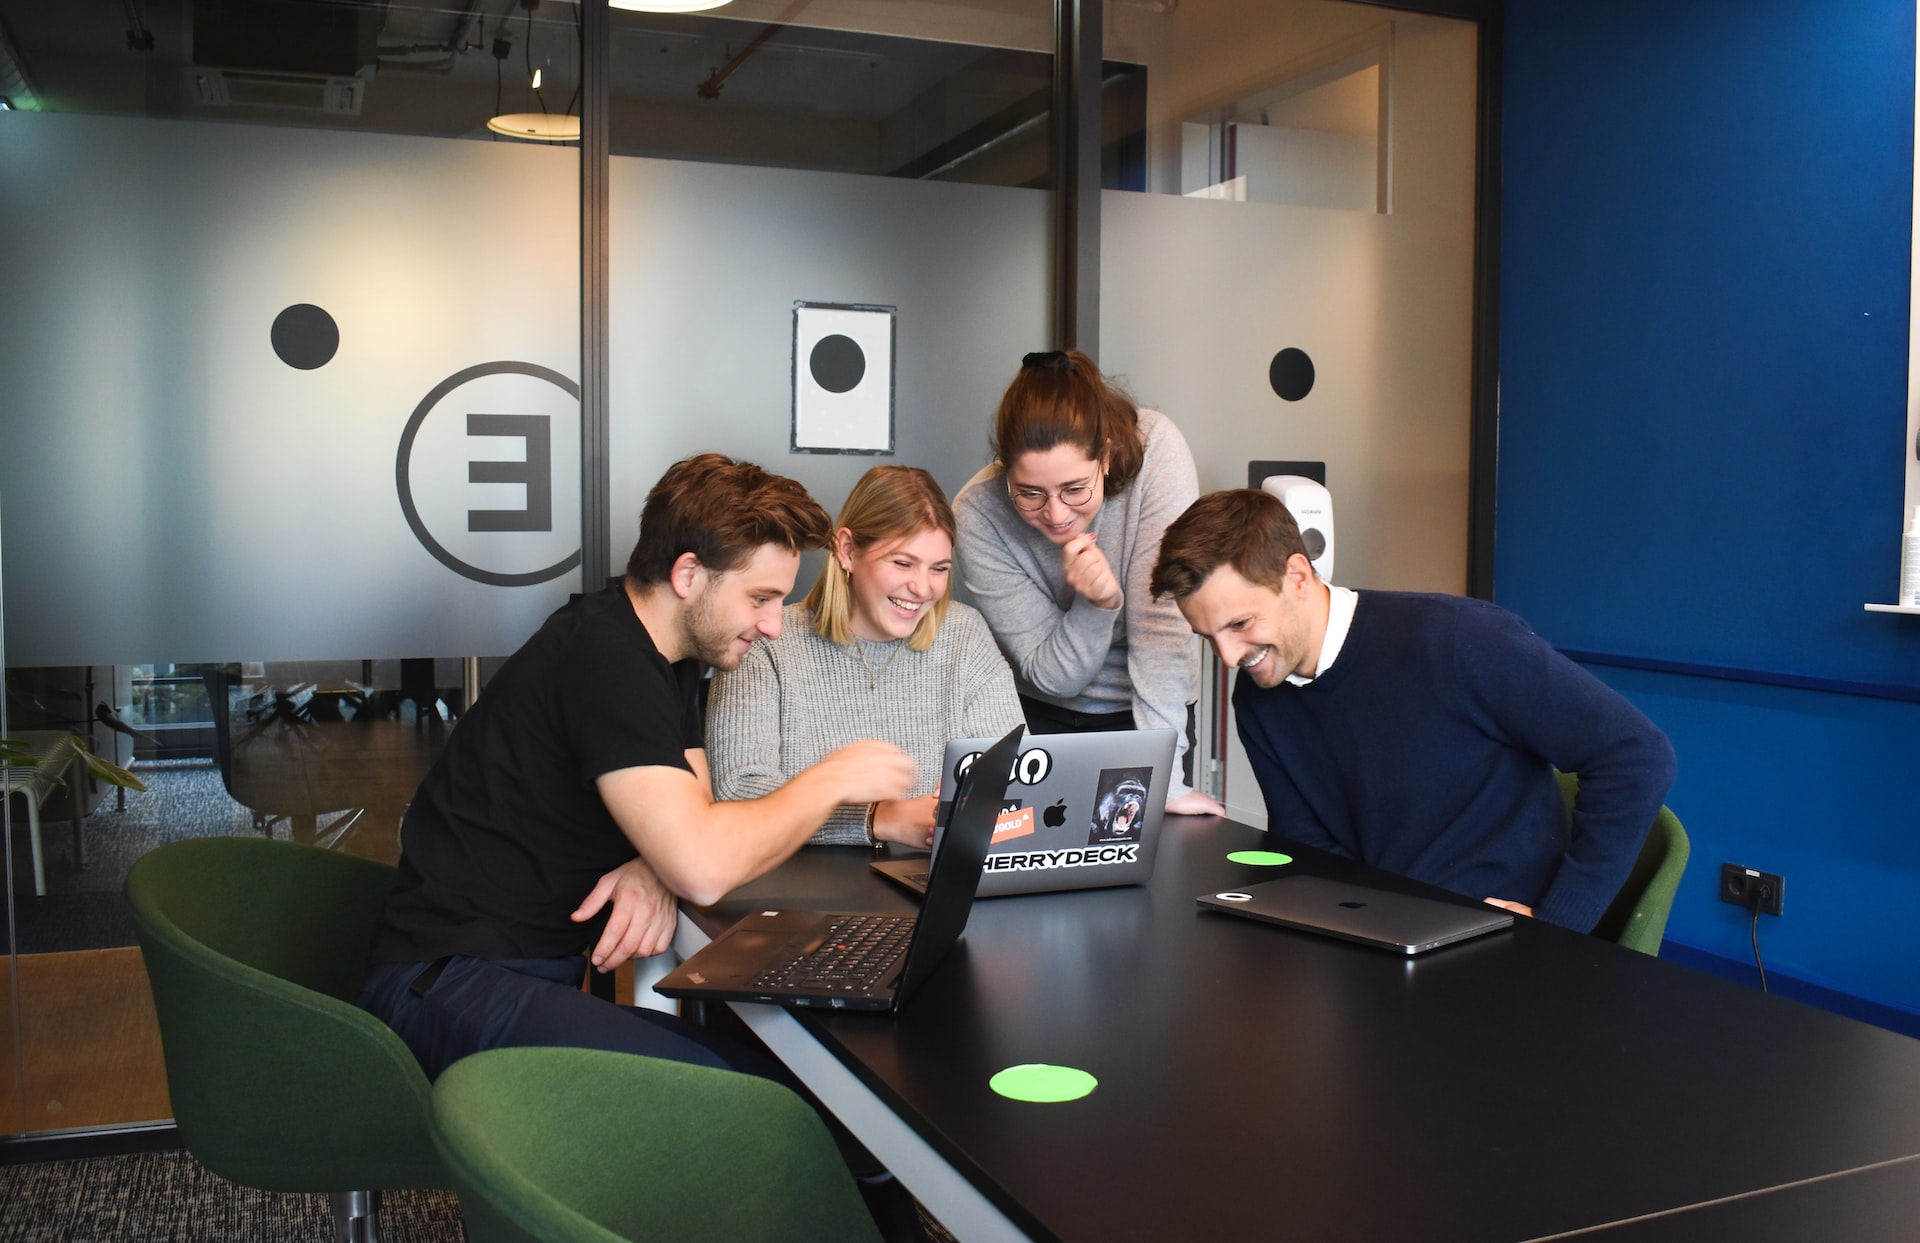 people working on a laptop together while smiling.